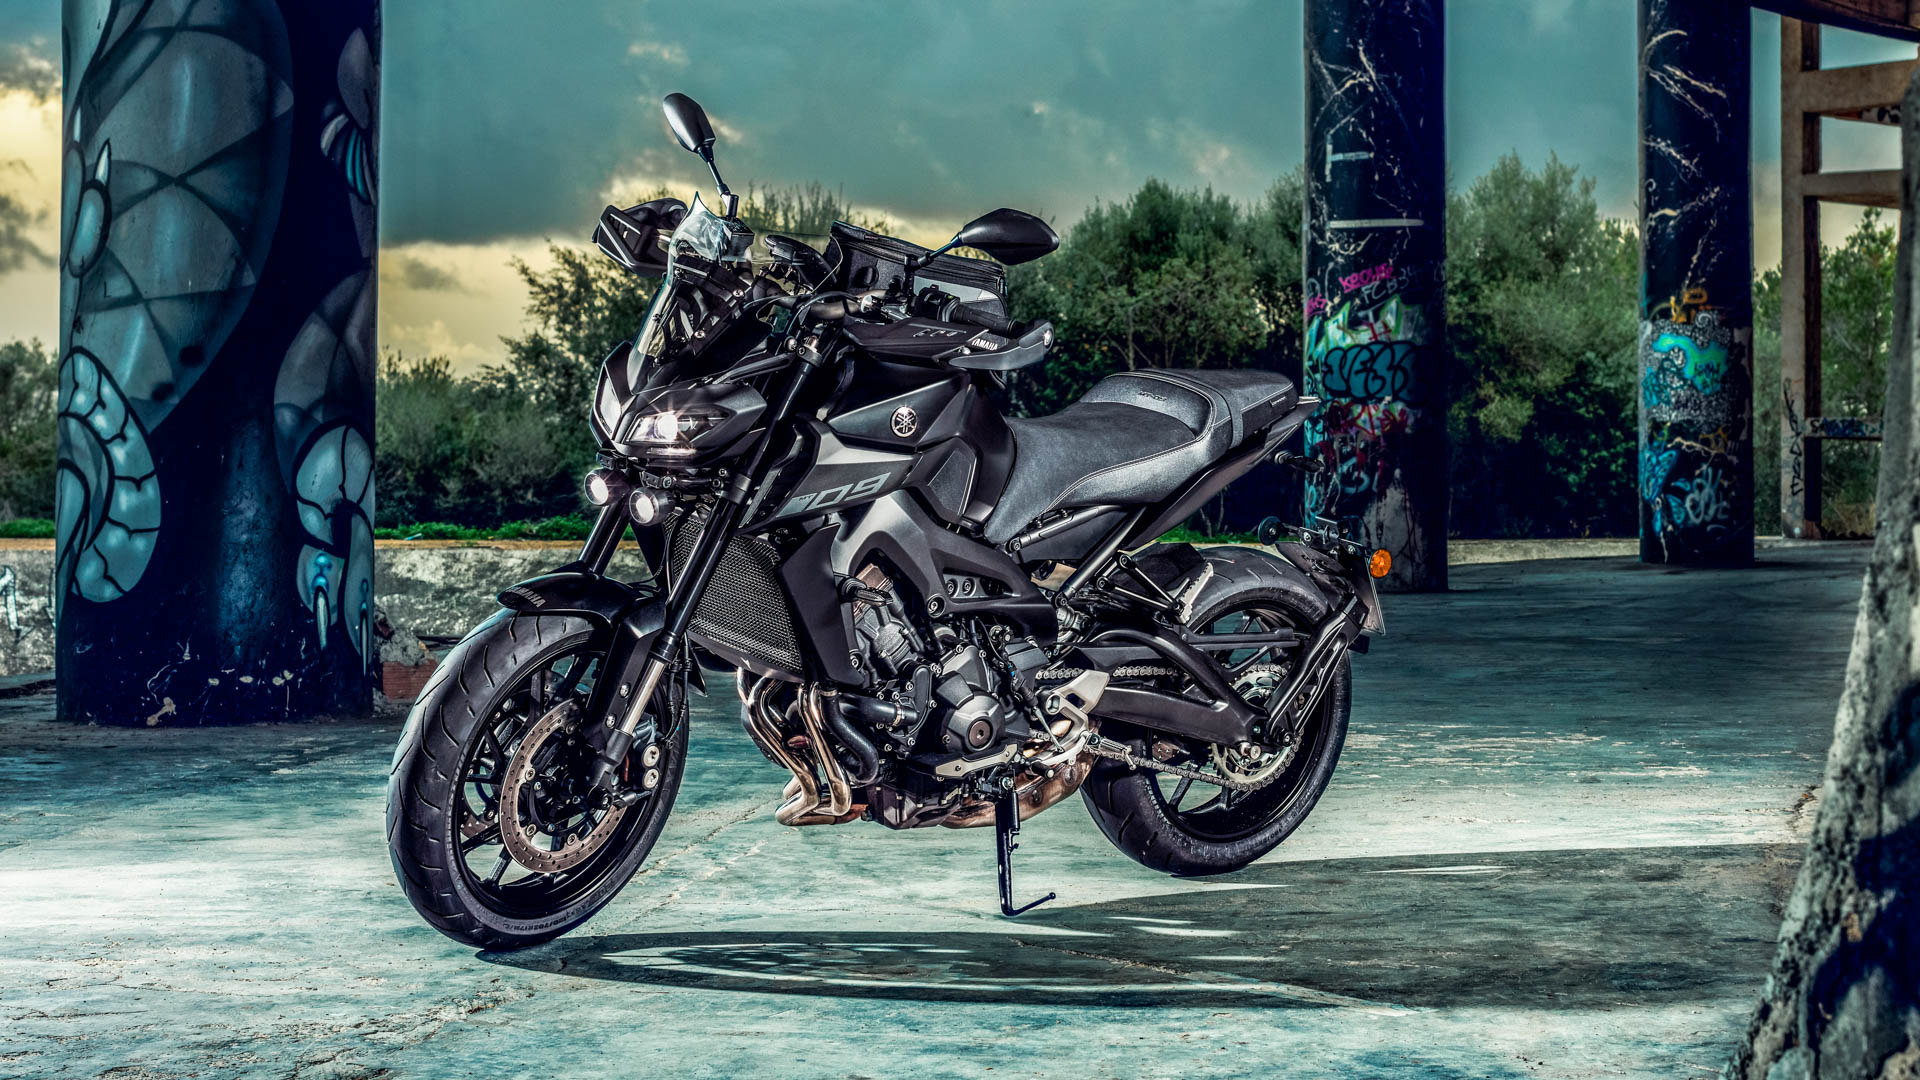 Yamaha MT-09, Iconic motorcycle, Stunning pictures, Motorcycle photography, 1920x1080 Full HD Desktop